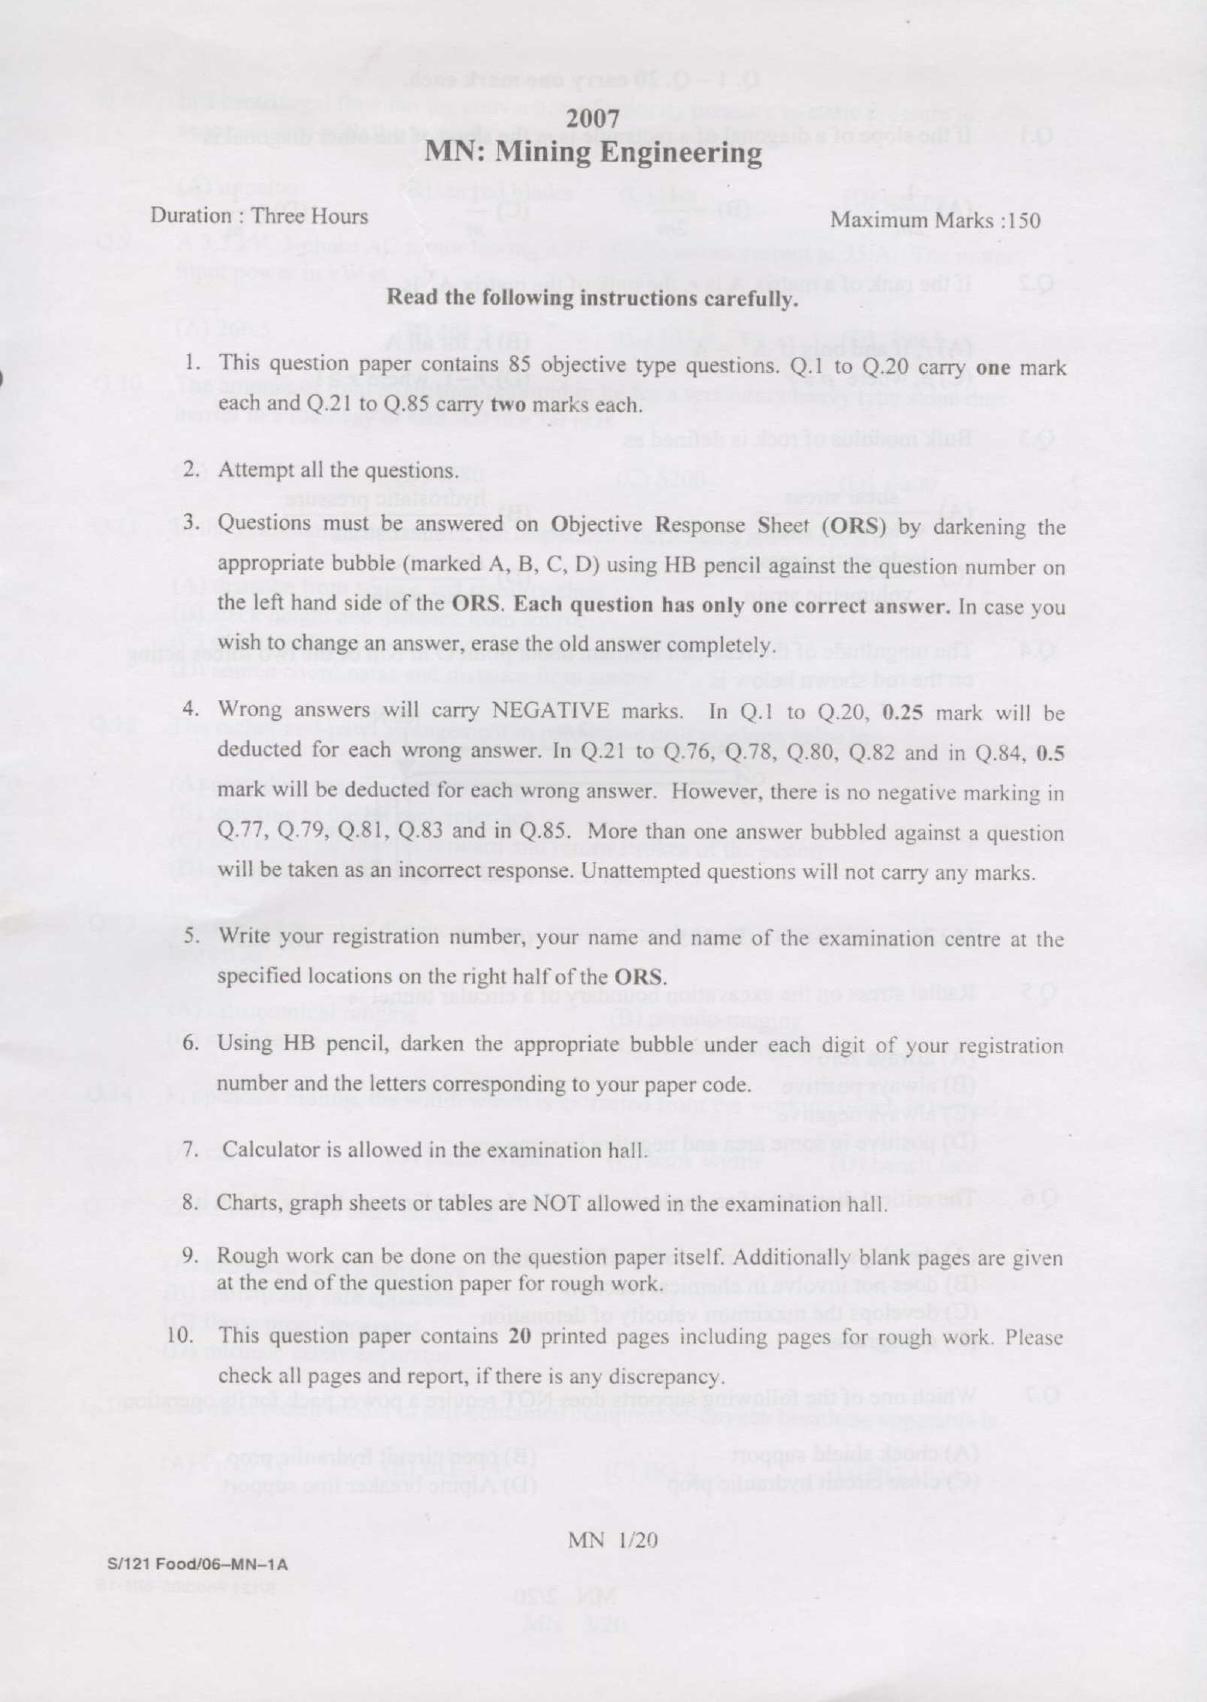 GATE 2007 Mining Engineering (MN) Question Paper with Answer Key - Page 1